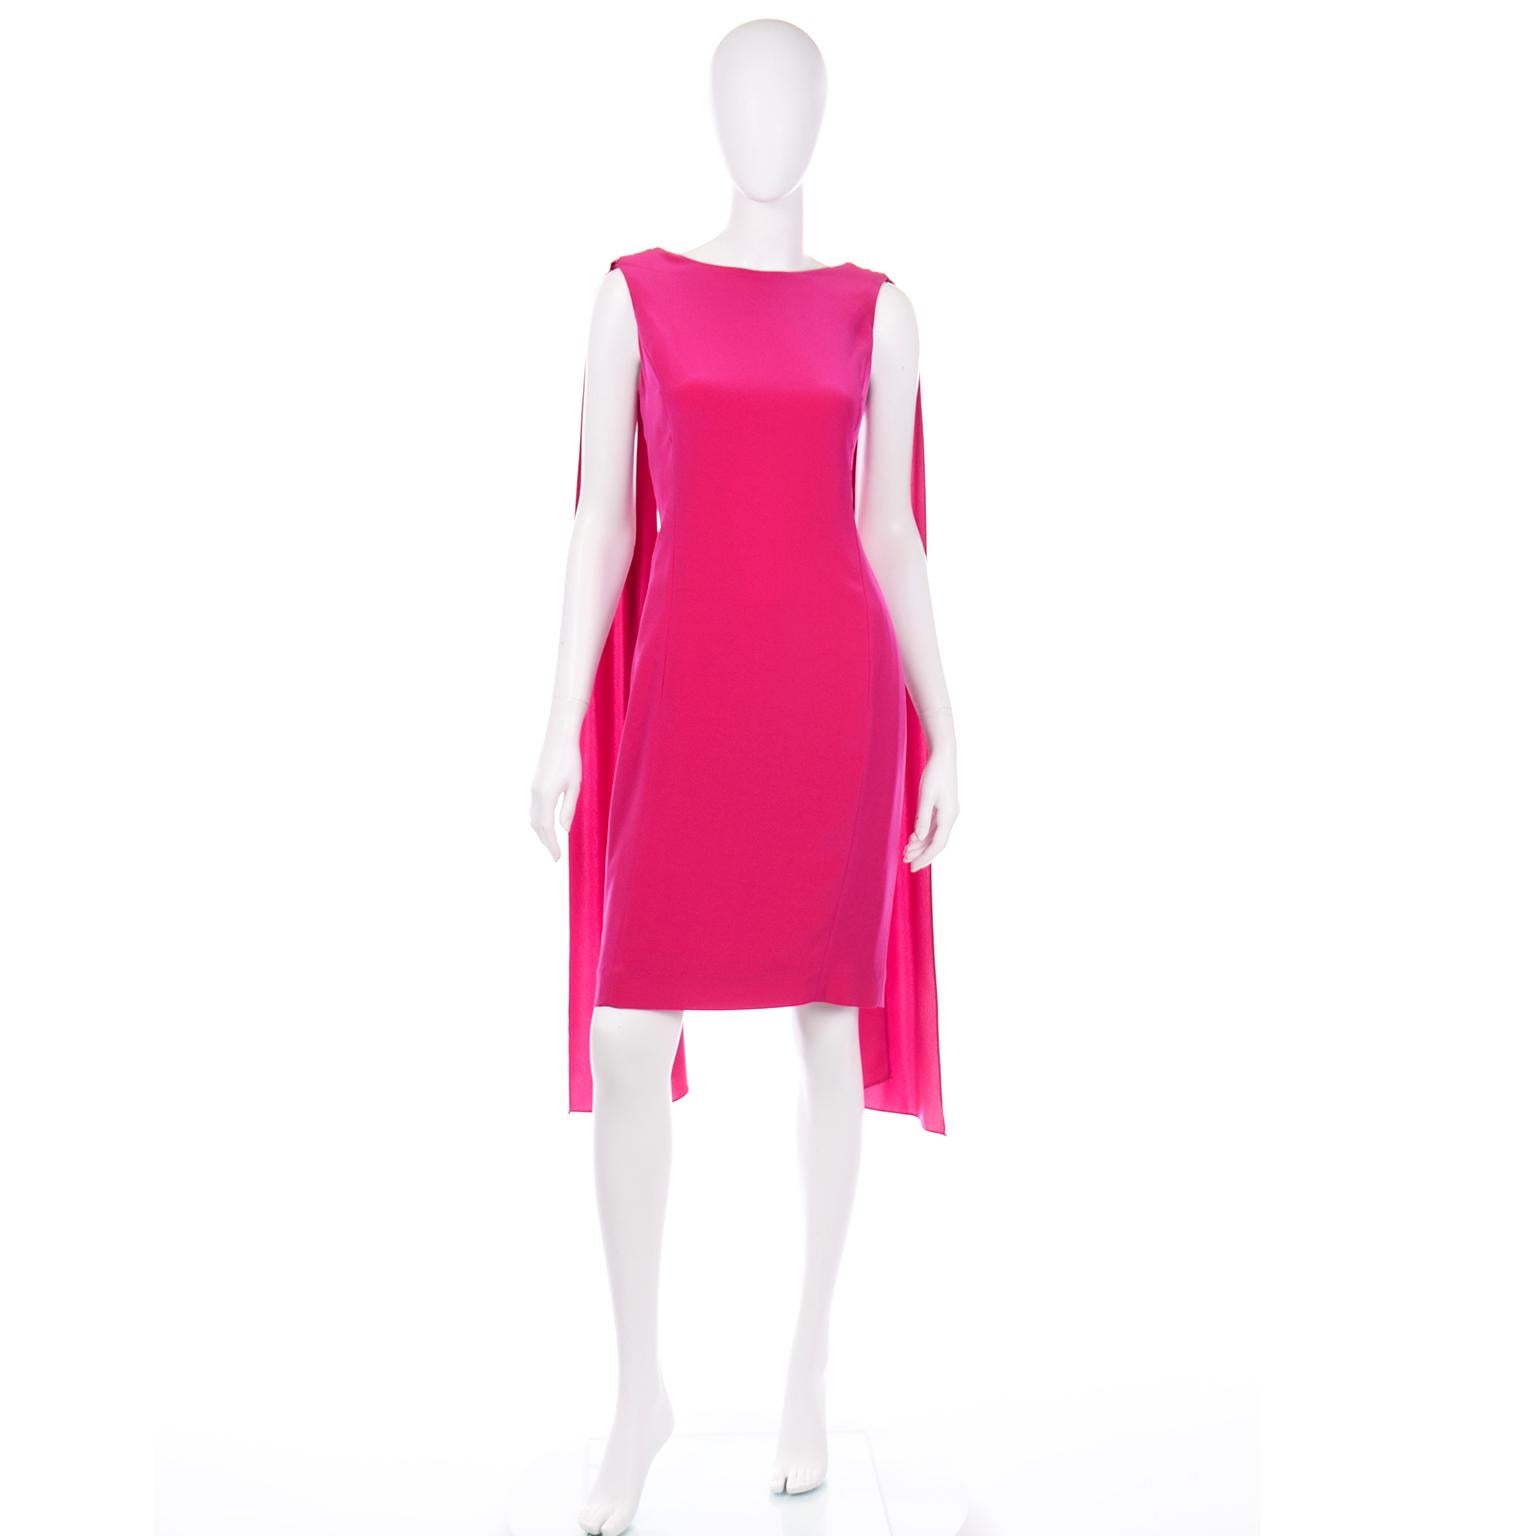 This is a stunning Albert Nipon pink sleeveless dress with a round neck, draped panels and a low back. The beautiful back is slightly v-shaped and is about 12